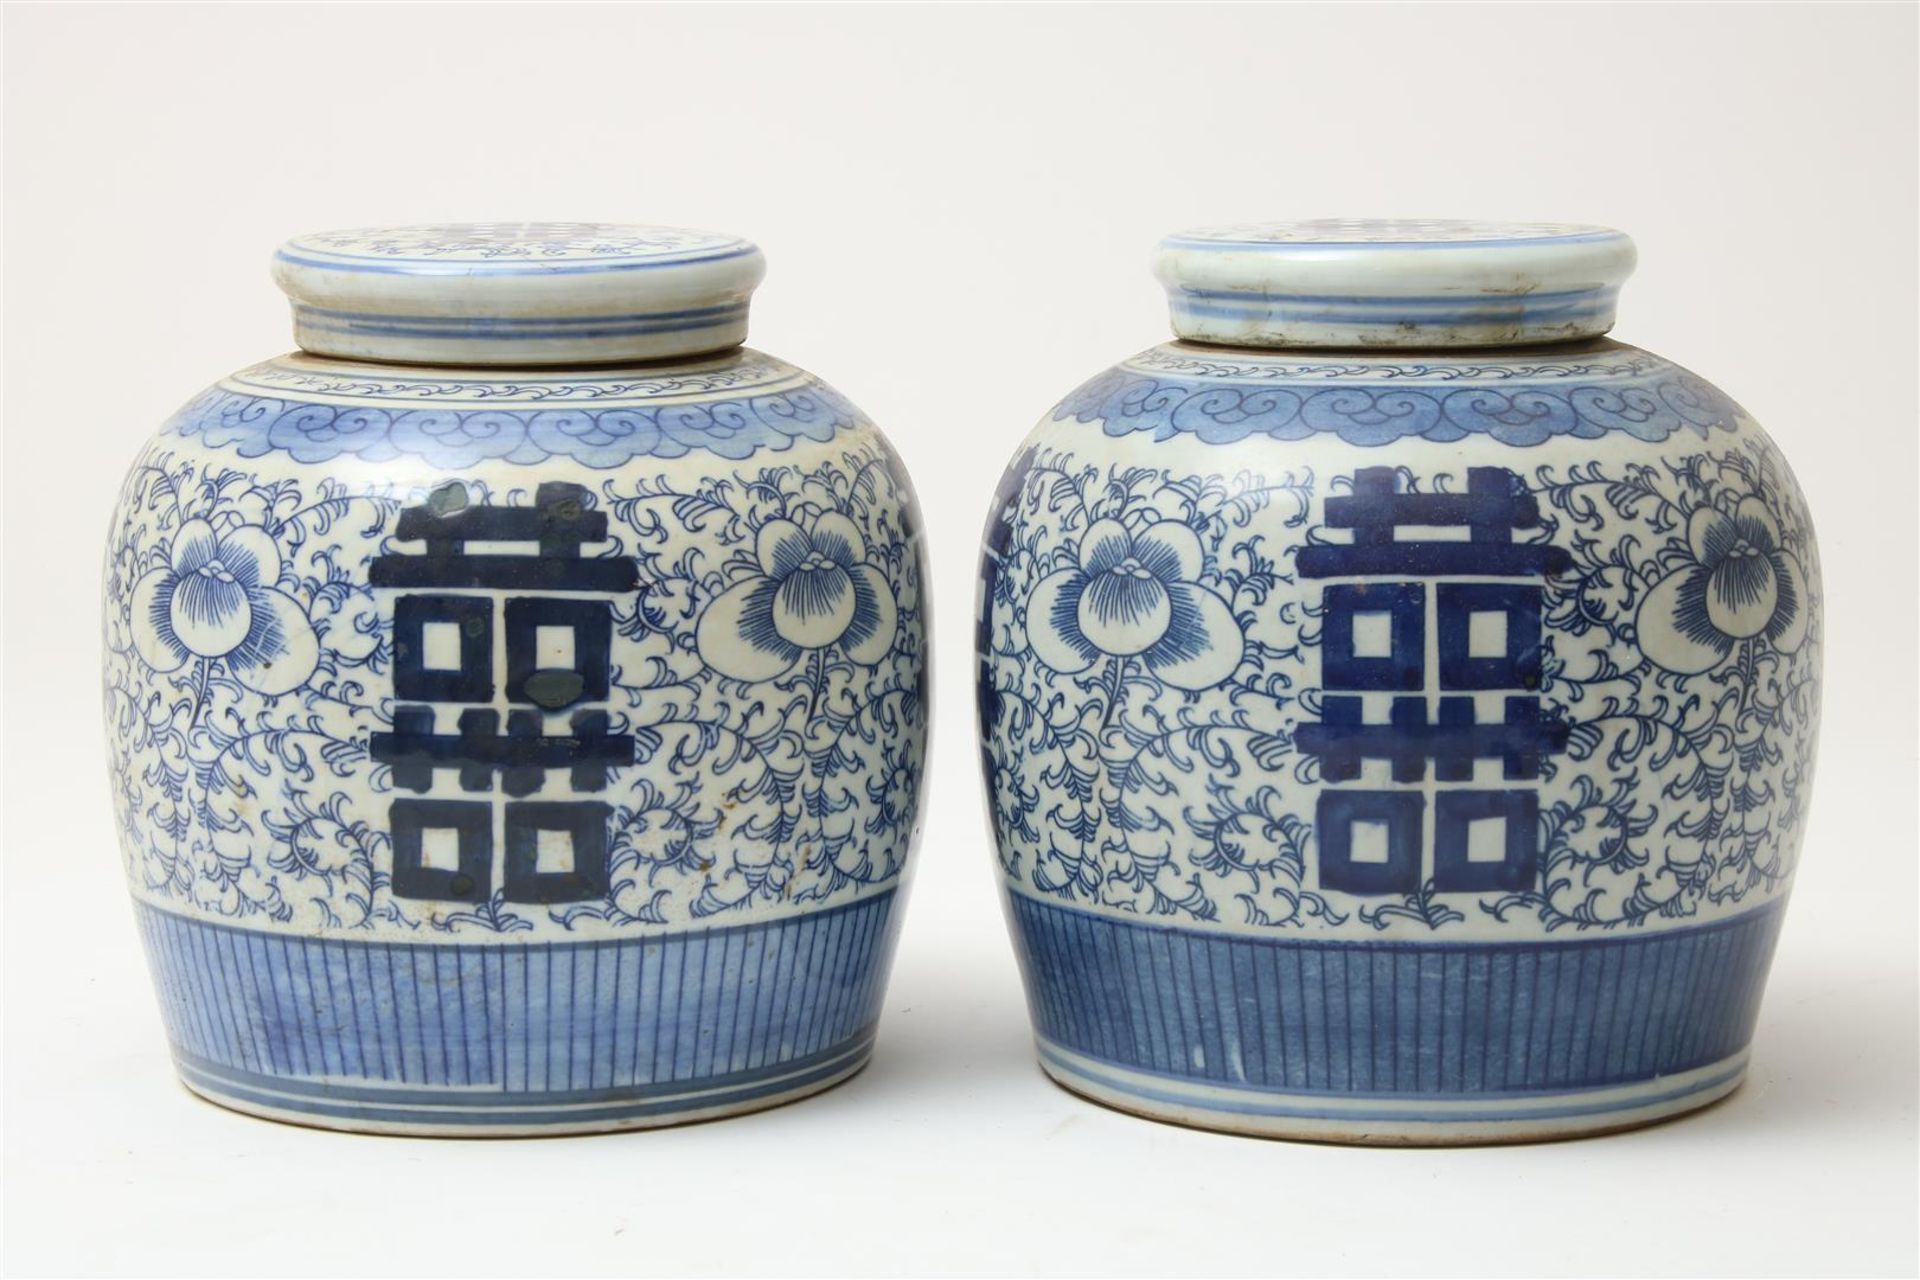 Set of blue and white porcelain ginger jars with lids decorated with blossom branches and